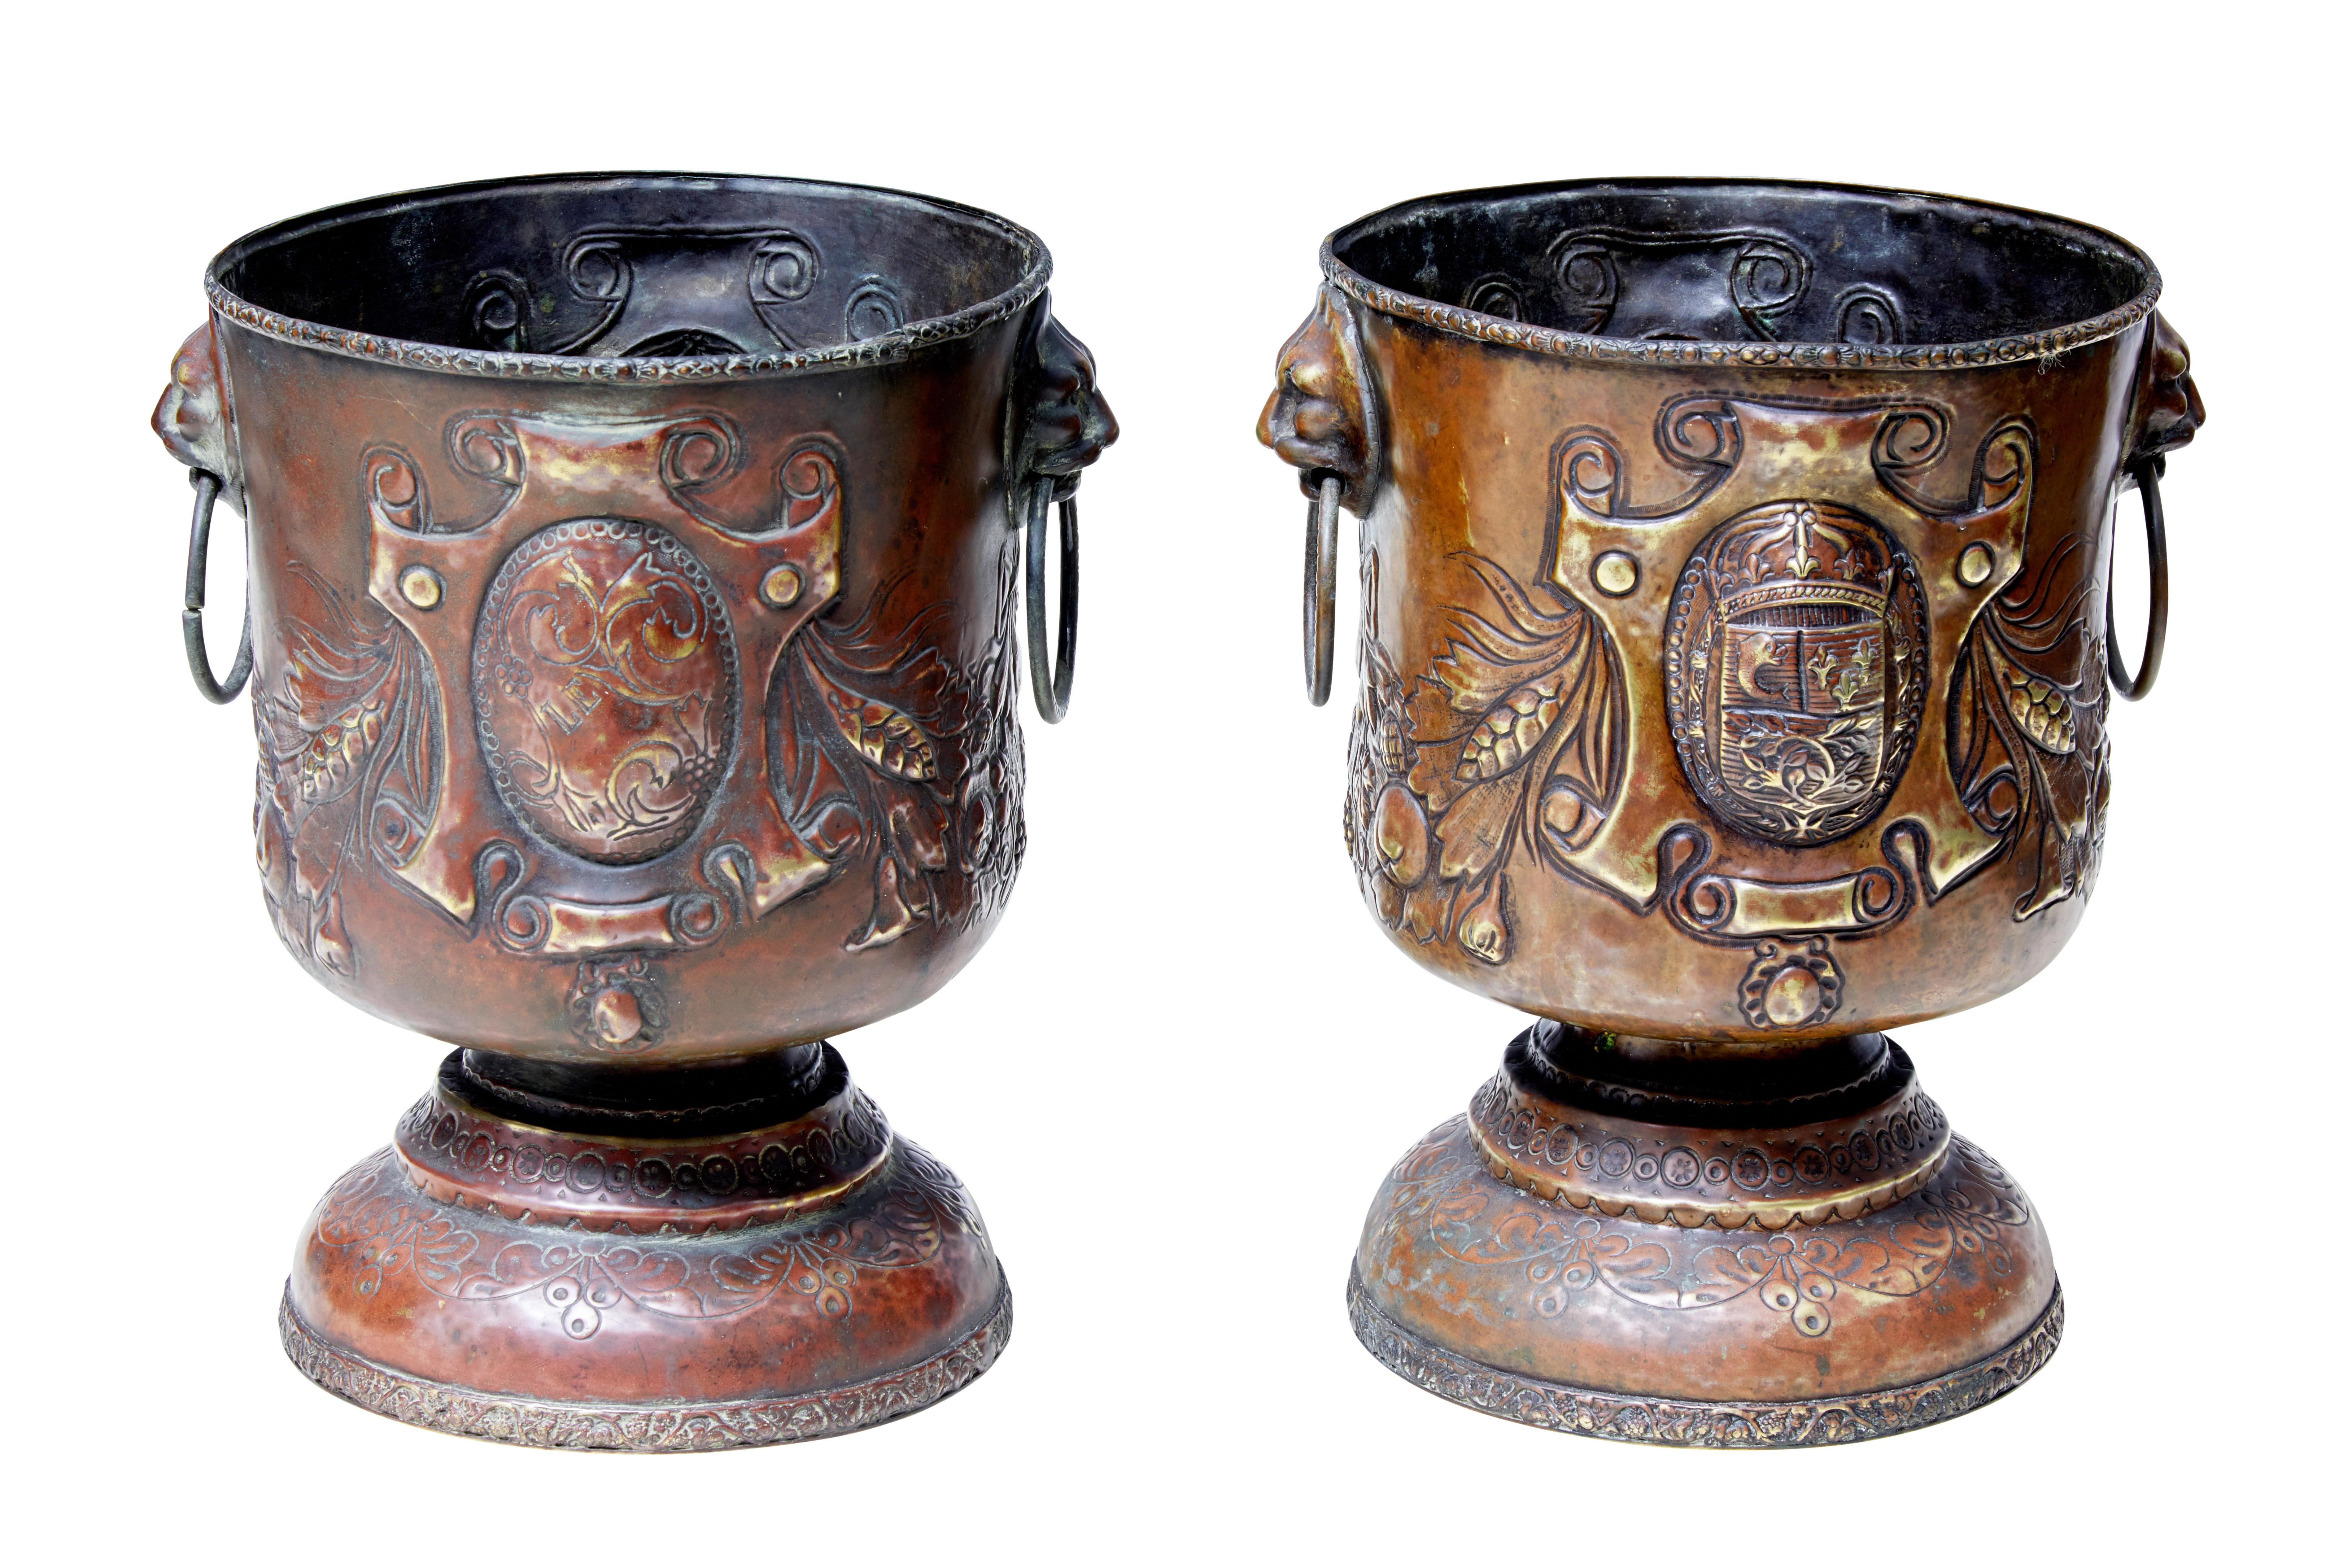 Pair of continental copper wine coolers or small jardinières, circa 1890.

Made using the repoussé technique. Decorated with armorial cartouches. Cup shape with lion mask ringed handles to the sides, standing on a domed base.

Rubbing to patina